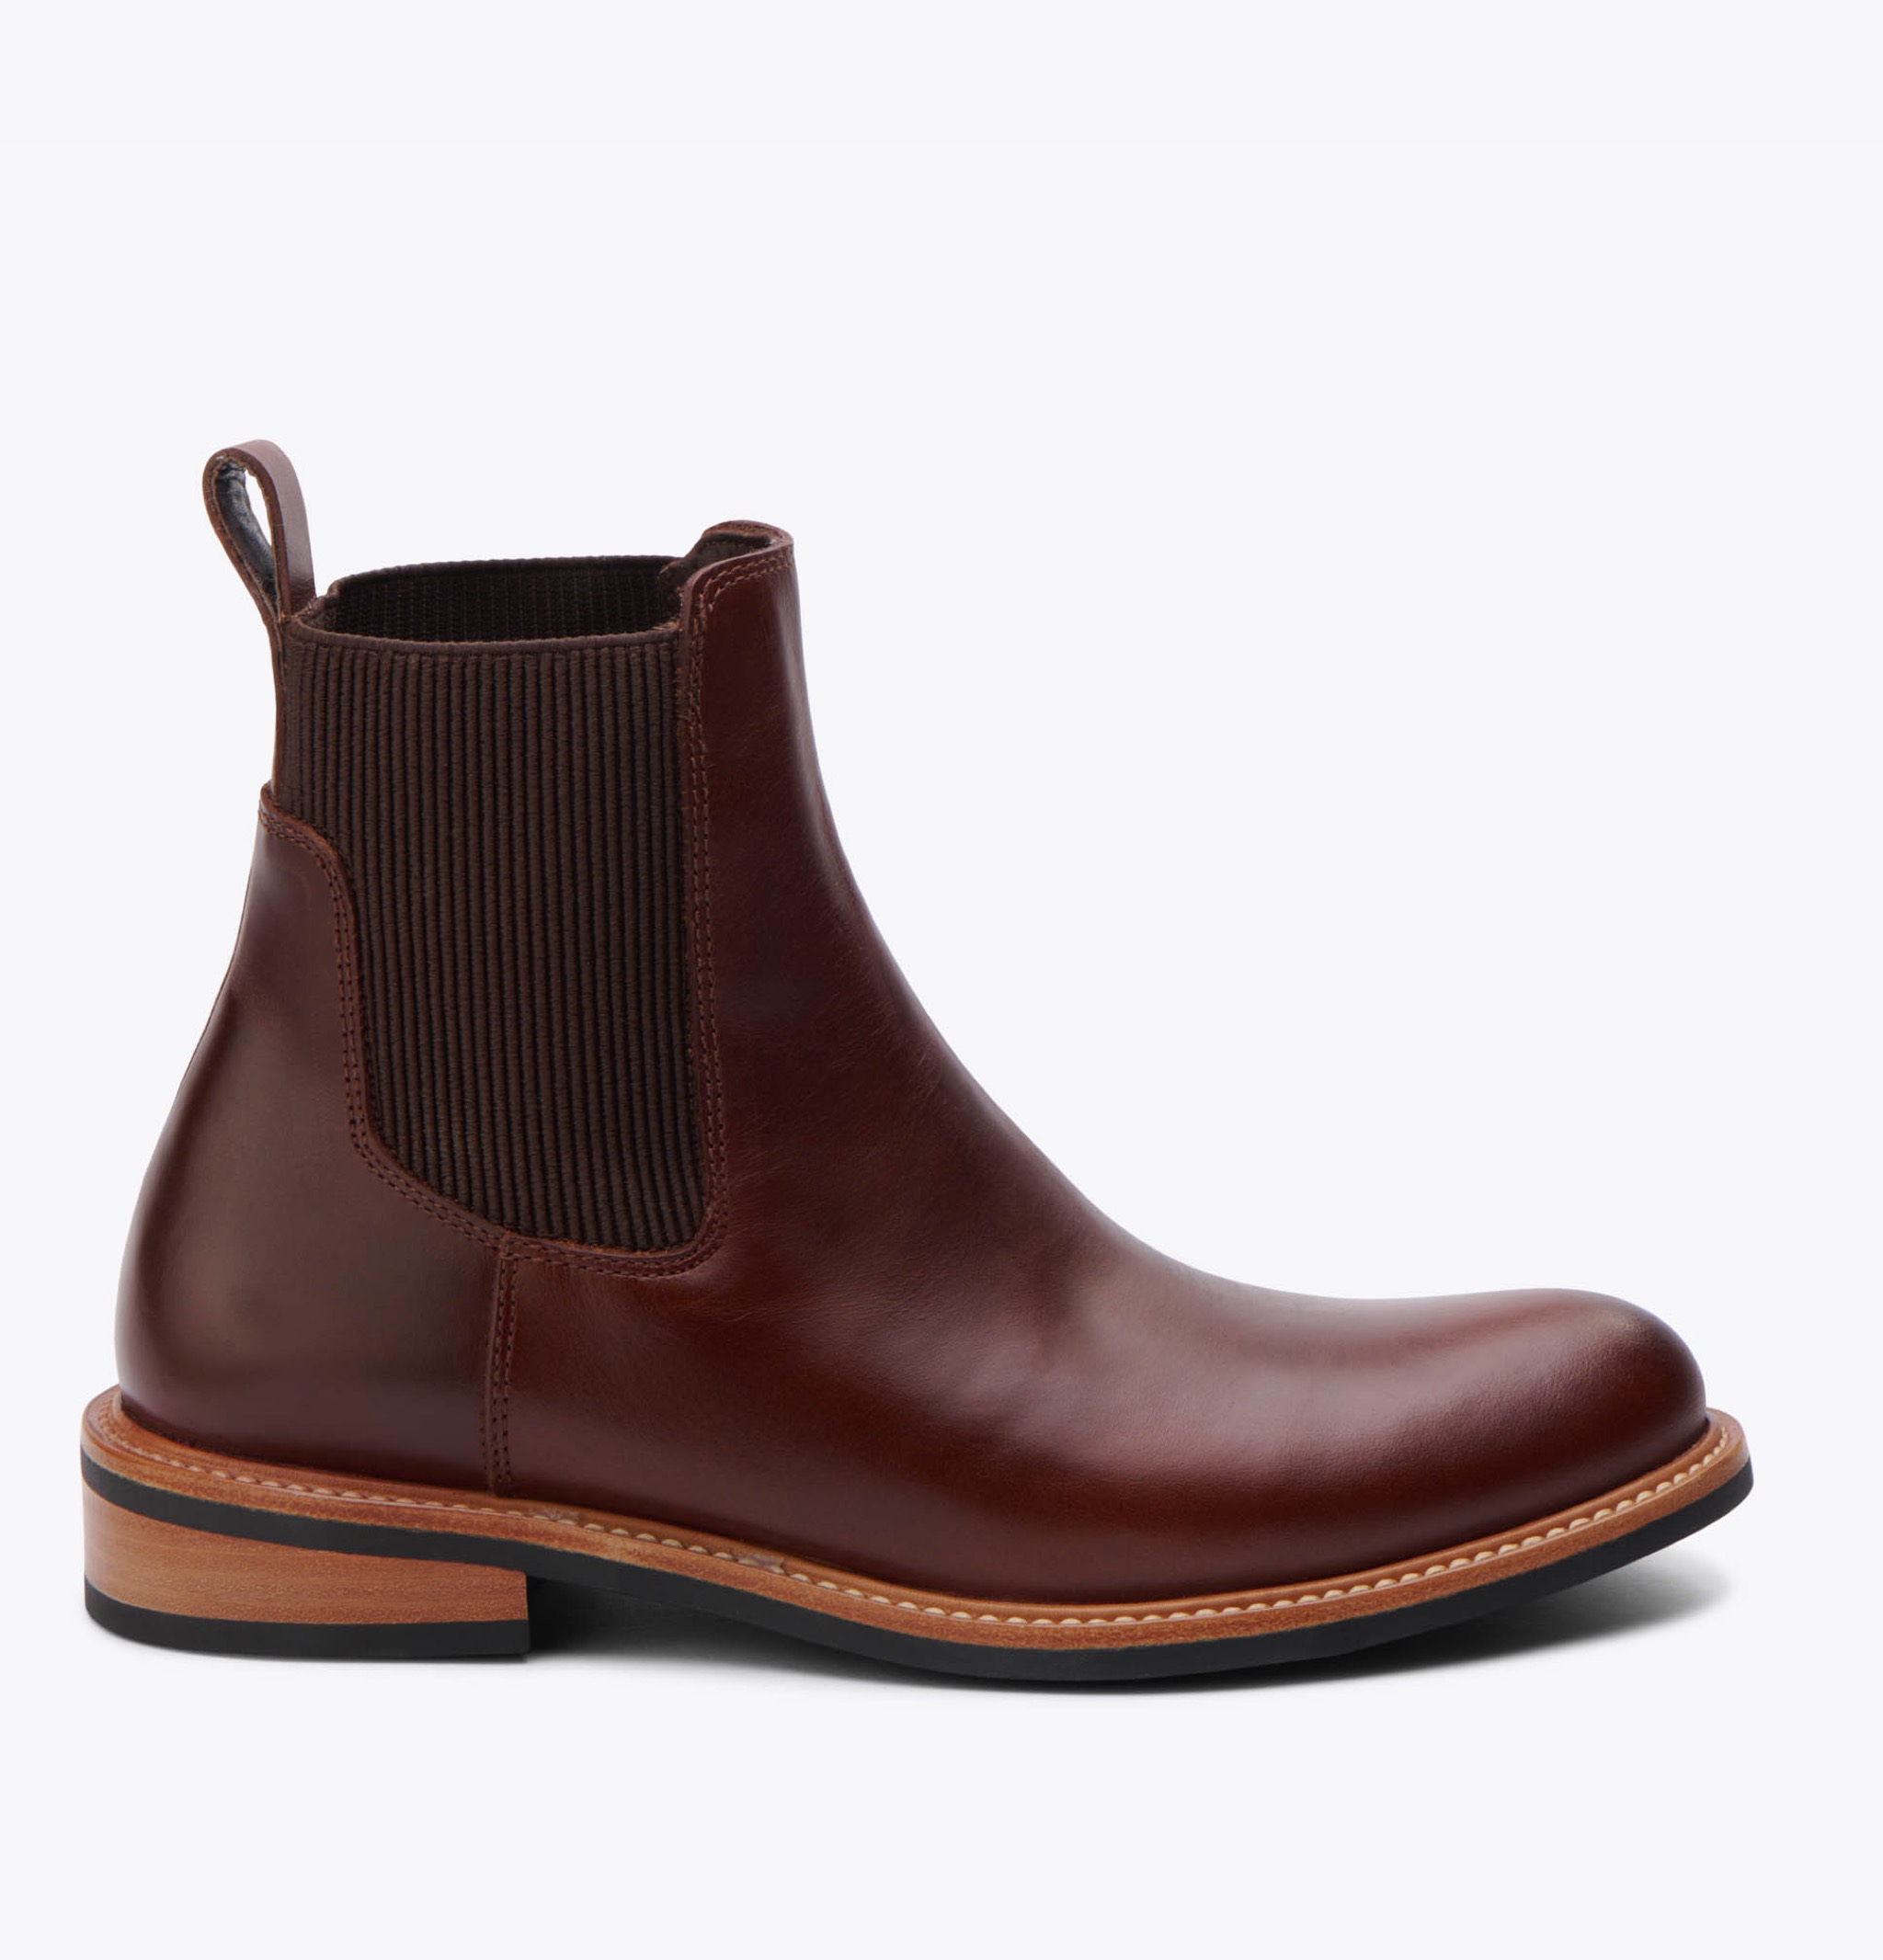 Nisolo Carmen Chelsea Boot Brandy - Every Nisolo product is built on the foundation of comfort, function, and design. 